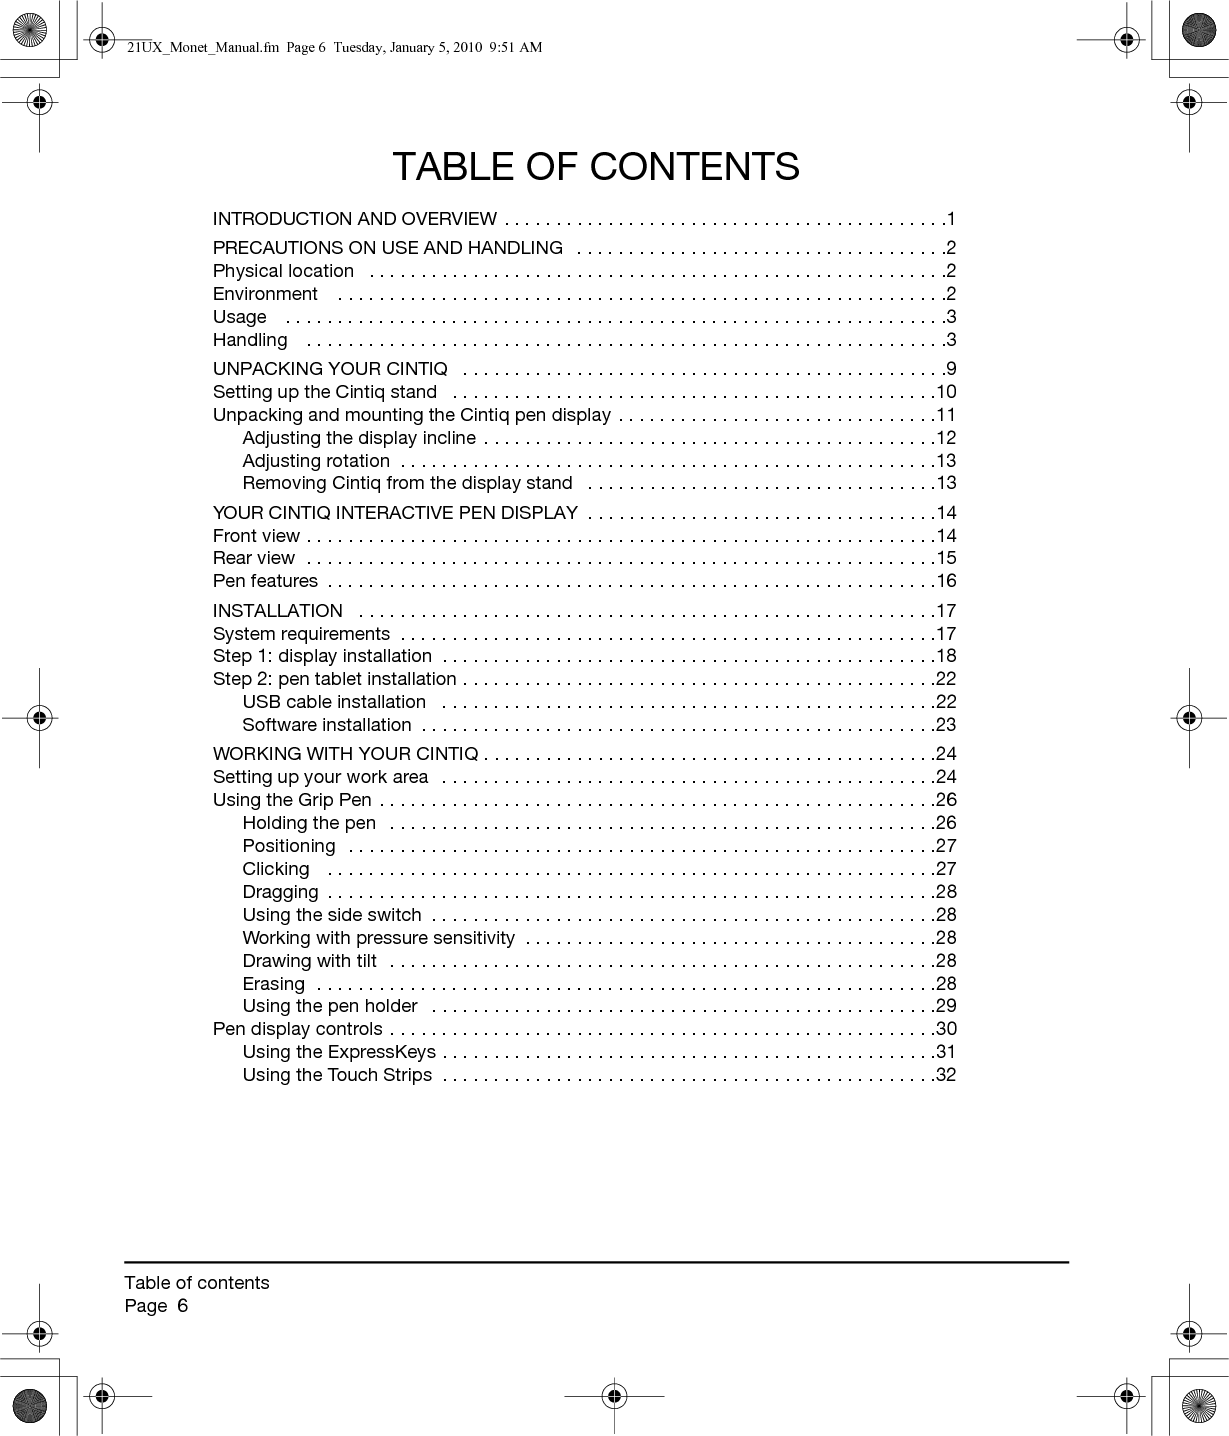 Table of contentsPage  6TABLE OF CONTENTSINTRODUCTION AND OVERVIEW . . . . . . . . . . . . . . . . . . . . . . . . . . . . . . . . . . . . . . . . . . .1PRECAUTIONS ON USE AND HANDLING   . . . . . . . . . . . . . . . . . . . . . . . . . . . . . . . . . . . .2Physical location   . . . . . . . . . . . . . . . . . . . . . . . . . . . . . . . . . . . . . . . . . . . . . . . . . . . . . . . .2Environment    . . . . . . . . . . . . . . . . . . . . . . . . . . . . . . . . . . . . . . . . . . . . . . . . . . . . . . . . . . .2Usage    . . . . . . . . . . . . . . . . . . . . . . . . . . . . . . . . . . . . . . . . . . . . . . . . . . . . . . . . . . . . . . . .3Handling    . . . . . . . . . . . . . . . . . . . . . . . . . . . . . . . . . . . . . . . . . . . . . . . . . . . . . . . . . . . . . .3UNPACKING YOUR CINTIQ   . . . . . . . . . . . . . . . . . . . . . . . . . . . . . . . . . . . . . . . . . . . . . . .9Setting up the Cintiq stand   . . . . . . . . . . . . . . . . . . . . . . . . . . . . . . . . . . . . . . . . . . . . . . .10Unpacking and mounting the Cintiq pen display  . . . . . . . . . . . . . . . . . . . . . . . . . . . . . . .11Adjusting the display incline . . . . . . . . . . . . . . . . . . . . . . . . . . . . . . . . . . . . . . . . . . . .12Adjusting rotation  . . . . . . . . . . . . . . . . . . . . . . . . . . . . . . . . . . . . . . . . . . . . . . . . . . . .13Removing Cintiq from the display stand   . . . . . . . . . . . . . . . . . . . . . . . . . . . . . . . . . .13YOUR CINTIQ INTERACTIVE PEN DISPLAY  . . . . . . . . . . . . . . . . . . . . . . . . . . . . . . . . . .14Front view . . . . . . . . . . . . . . . . . . . . . . . . . . . . . . . . . . . . . . . . . . . . . . . . . . . . . . . . . . . . .14Rear view  . . . . . . . . . . . . . . . . . . . . . . . . . . . . . . . . . . . . . . . . . . . . . . . . . . . . . . . . . . . . .15Pen features  . . . . . . . . . . . . . . . . . . . . . . . . . . . . . . . . . . . . . . . . . . . . . . . . . . . . . . . . . . .16INSTALLATION   . . . . . . . . . . . . . . . . . . . . . . . . . . . . . . . . . . . . . . . . . . . . . . . . . . . . . . . .17System requirements  . . . . . . . . . . . . . . . . . . . . . . . . . . . . . . . . . . . . . . . . . . . . . . . . . . . .17Step 1: display installation  . . . . . . . . . . . . . . . . . . . . . . . . . . . . . . . . . . . . . . . . . . . . . . . .18Step 2: pen tablet installation . . . . . . . . . . . . . . . . . . . . . . . . . . . . . . . . . . . . . . . . . . . . . .22USB cable installation   . . . . . . . . . . . . . . . . . . . . . . . . . . . . . . . . . . . . . . . . . . . . . . . .22Software installation  . . . . . . . . . . . . . . . . . . . . . . . . . . . . . . . . . . . . . . . . . . . . . . . . . .23WORKING WITH YOUR CINTIQ . . . . . . . . . . . . . . . . . . . . . . . . . . . . . . . . . . . . . . . . . . . .24Setting up your work area   . . . . . . . . . . . . . . . . . . . . . . . . . . . . . . . . . . . . . . . . . . . . . . . .24Using the Grip Pen . . . . . . . . . . . . . . . . . . . . . . . . . . . . . . . . . . . . . . . . . . . . . . . . . . . . . .26Holding the pen   . . . . . . . . . . . . . . . . . . . . . . . . . . . . . . . . . . . . . . . . . . . . . . . . . . . . .26Positioning  . . . . . . . . . . . . . . . . . . . . . . . . . . . . . . . . . . . . . . . . . . . . . . . . . . . . . . . . .27Clicking   . . . . . . . . . . . . . . . . . . . . . . . . . . . . . . . . . . . . . . . . . . . . . . . . . . . . . . . . . . .27Dragging  . . . . . . . . . . . . . . . . . . . . . . . . . . . . . . . . . . . . . . . . . . . . . . . . . . . . . . . . . . .28Using the side switch  . . . . . . . . . . . . . . . . . . . . . . . . . . . . . . . . . . . . . . . . . . . . . . . . .28Working with pressure sensitivity  . . . . . . . . . . . . . . . . . . . . . . . . . . . . . . . . . . . . . . . .28Drawing with tilt  . . . . . . . . . . . . . . . . . . . . . . . . . . . . . . . . . . . . . . . . . . . . . . . . . . . . .28Erasing  . . . . . . . . . . . . . . . . . . . . . . . . . . . . . . . . . . . . . . . . . . . . . . . . . . . . . . . . . . . .28Using the pen holder   . . . . . . . . . . . . . . . . . . . . . . . . . . . . . . . . . . . . . . . . . . . . . . . . .29Pen display controls . . . . . . . . . . . . . . . . . . . . . . . . . . . . . . . . . . . . . . . . . . . . . . . . . . . . .30Using the ExpressKeys . . . . . . . . . . . . . . . . . . . . . . . . . . . . . . . . . . . . . . . . . . . . . . . .31Using the Touch Strips  . . . . . . . . . . . . . . . . . . . . . . . . . . . . . . . . . . . . . . . . . . . . . . . .3221UX_Monet_Manual.fm  Page 6  Tuesday, January 5, 2010  9:51 AM